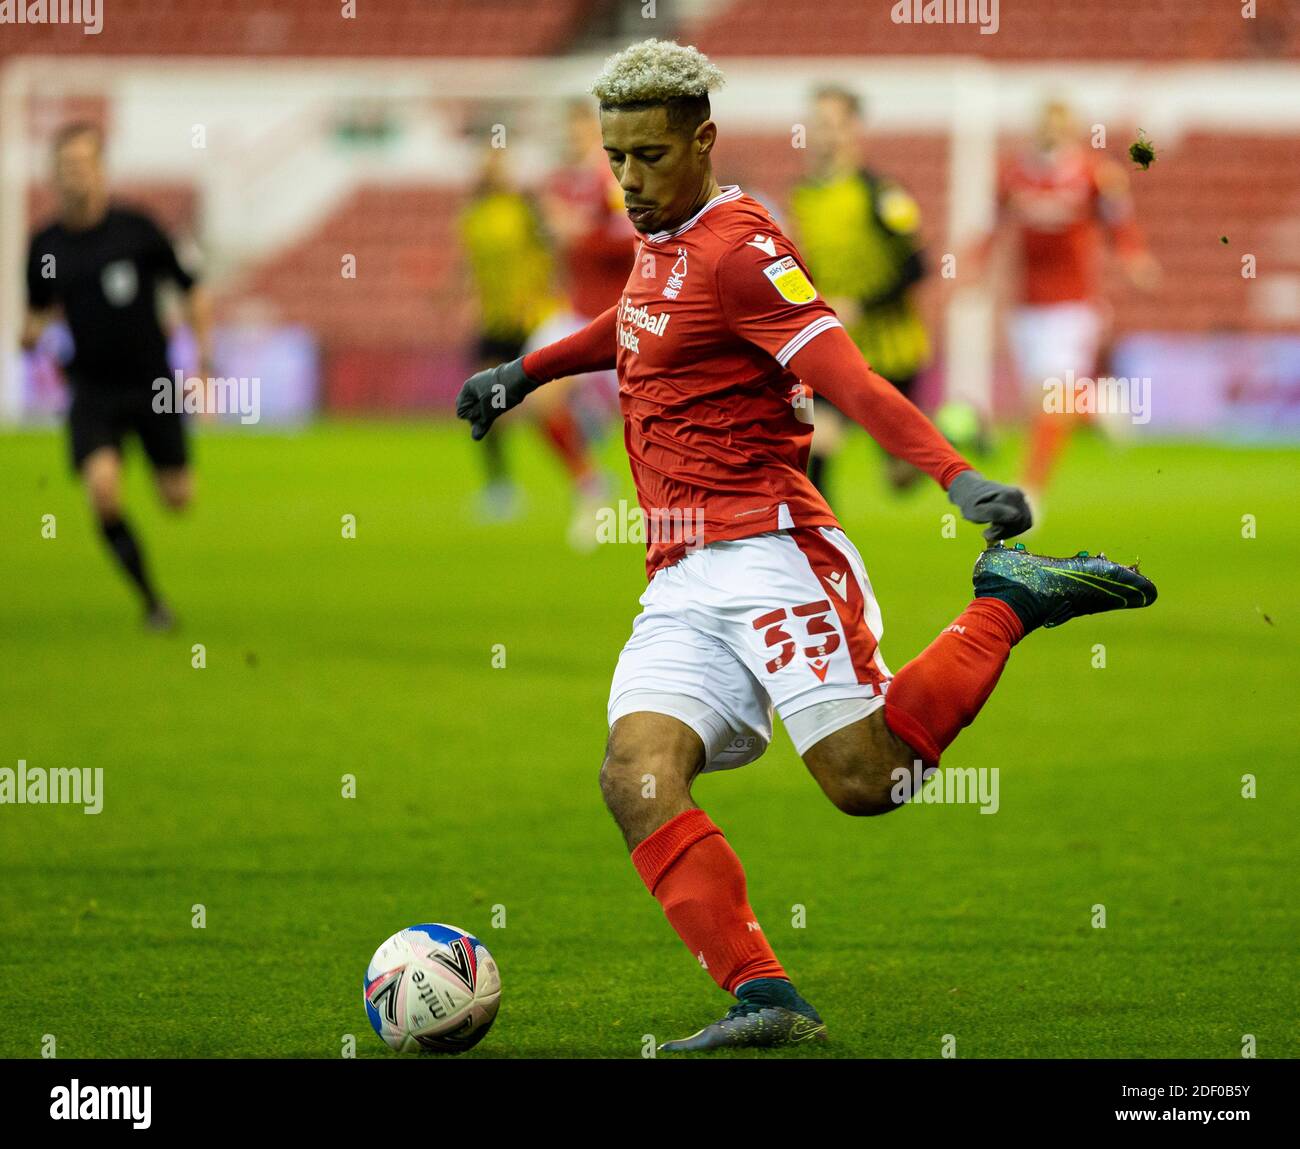 City Ground, Nottinghamshire, Midlands, UK. 2nd Dec, 2020. English Football League Championship Football, Nottingham Forest versus Watford; Lyle Taylor of Nottingham Forest crossing the ball into the Watford box Credit: Action Plus Sports/Alamy Live News Stock Photo